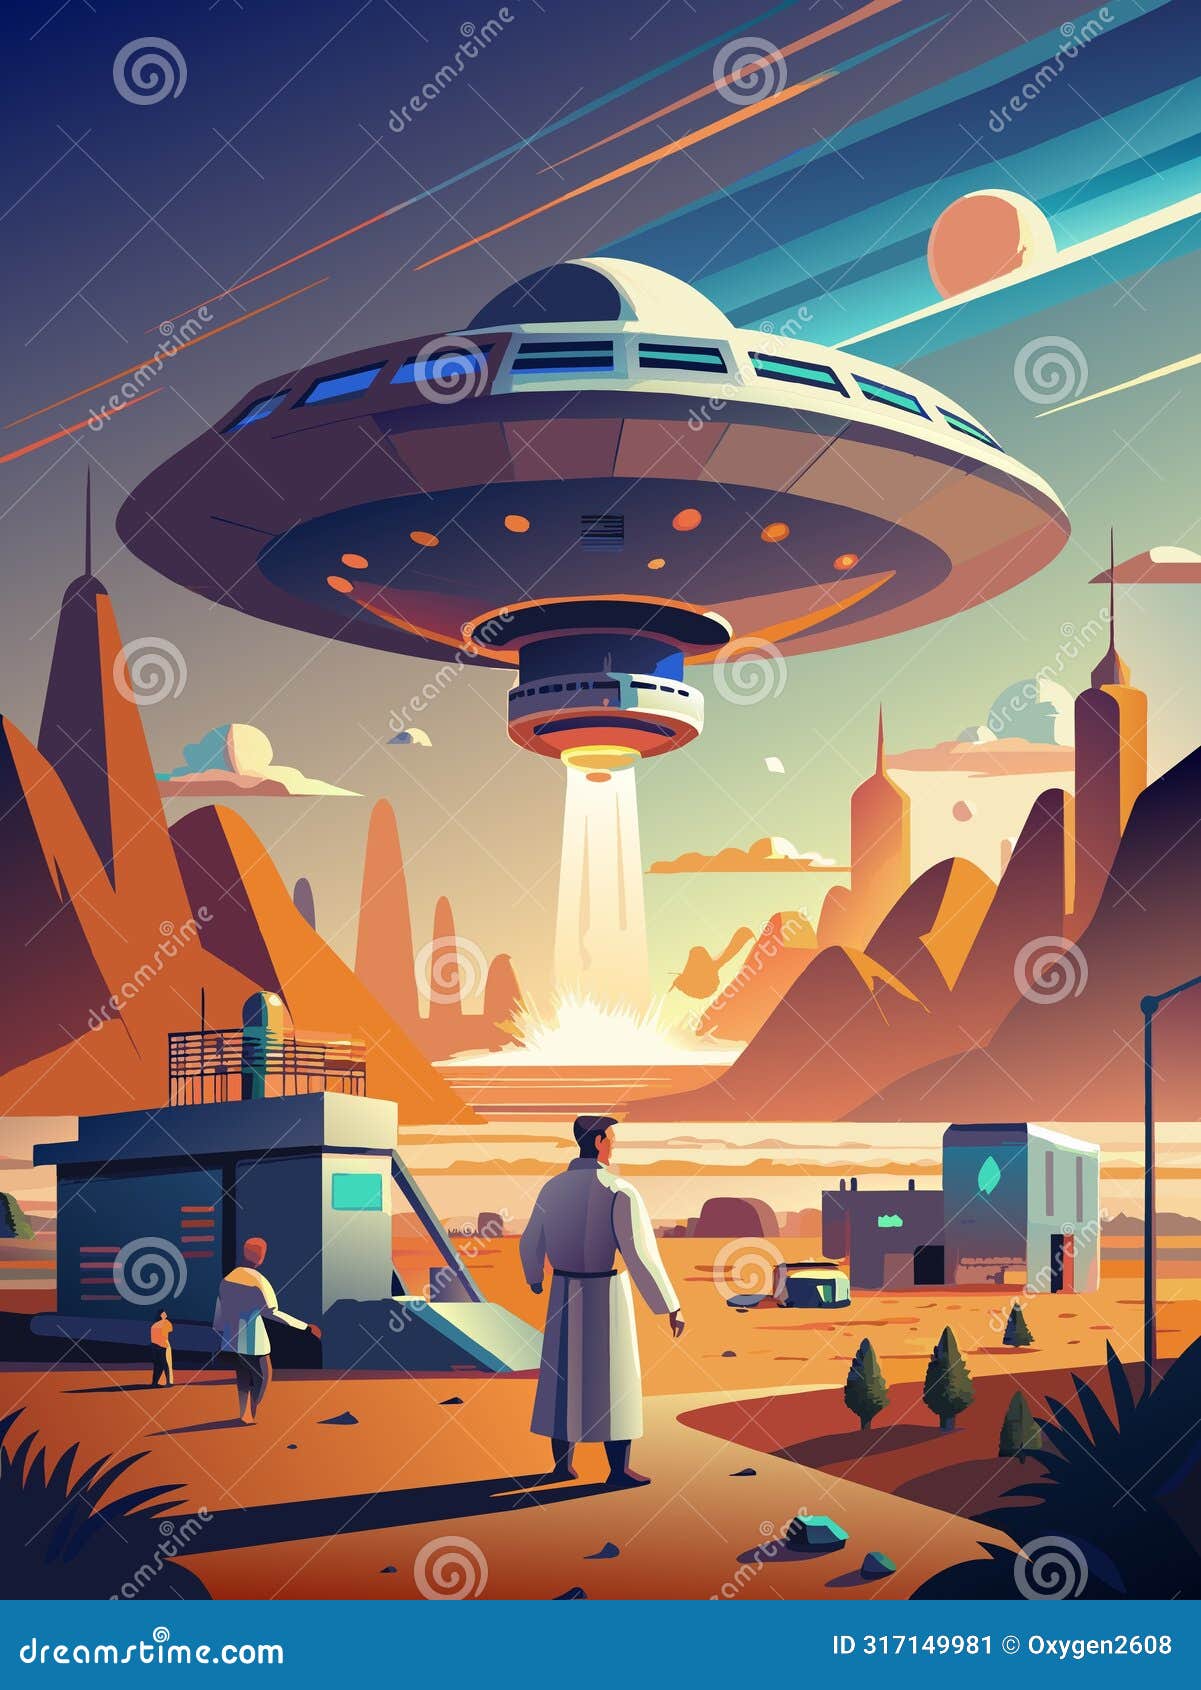 futuristic cityscape with hovering ufo and observing characters